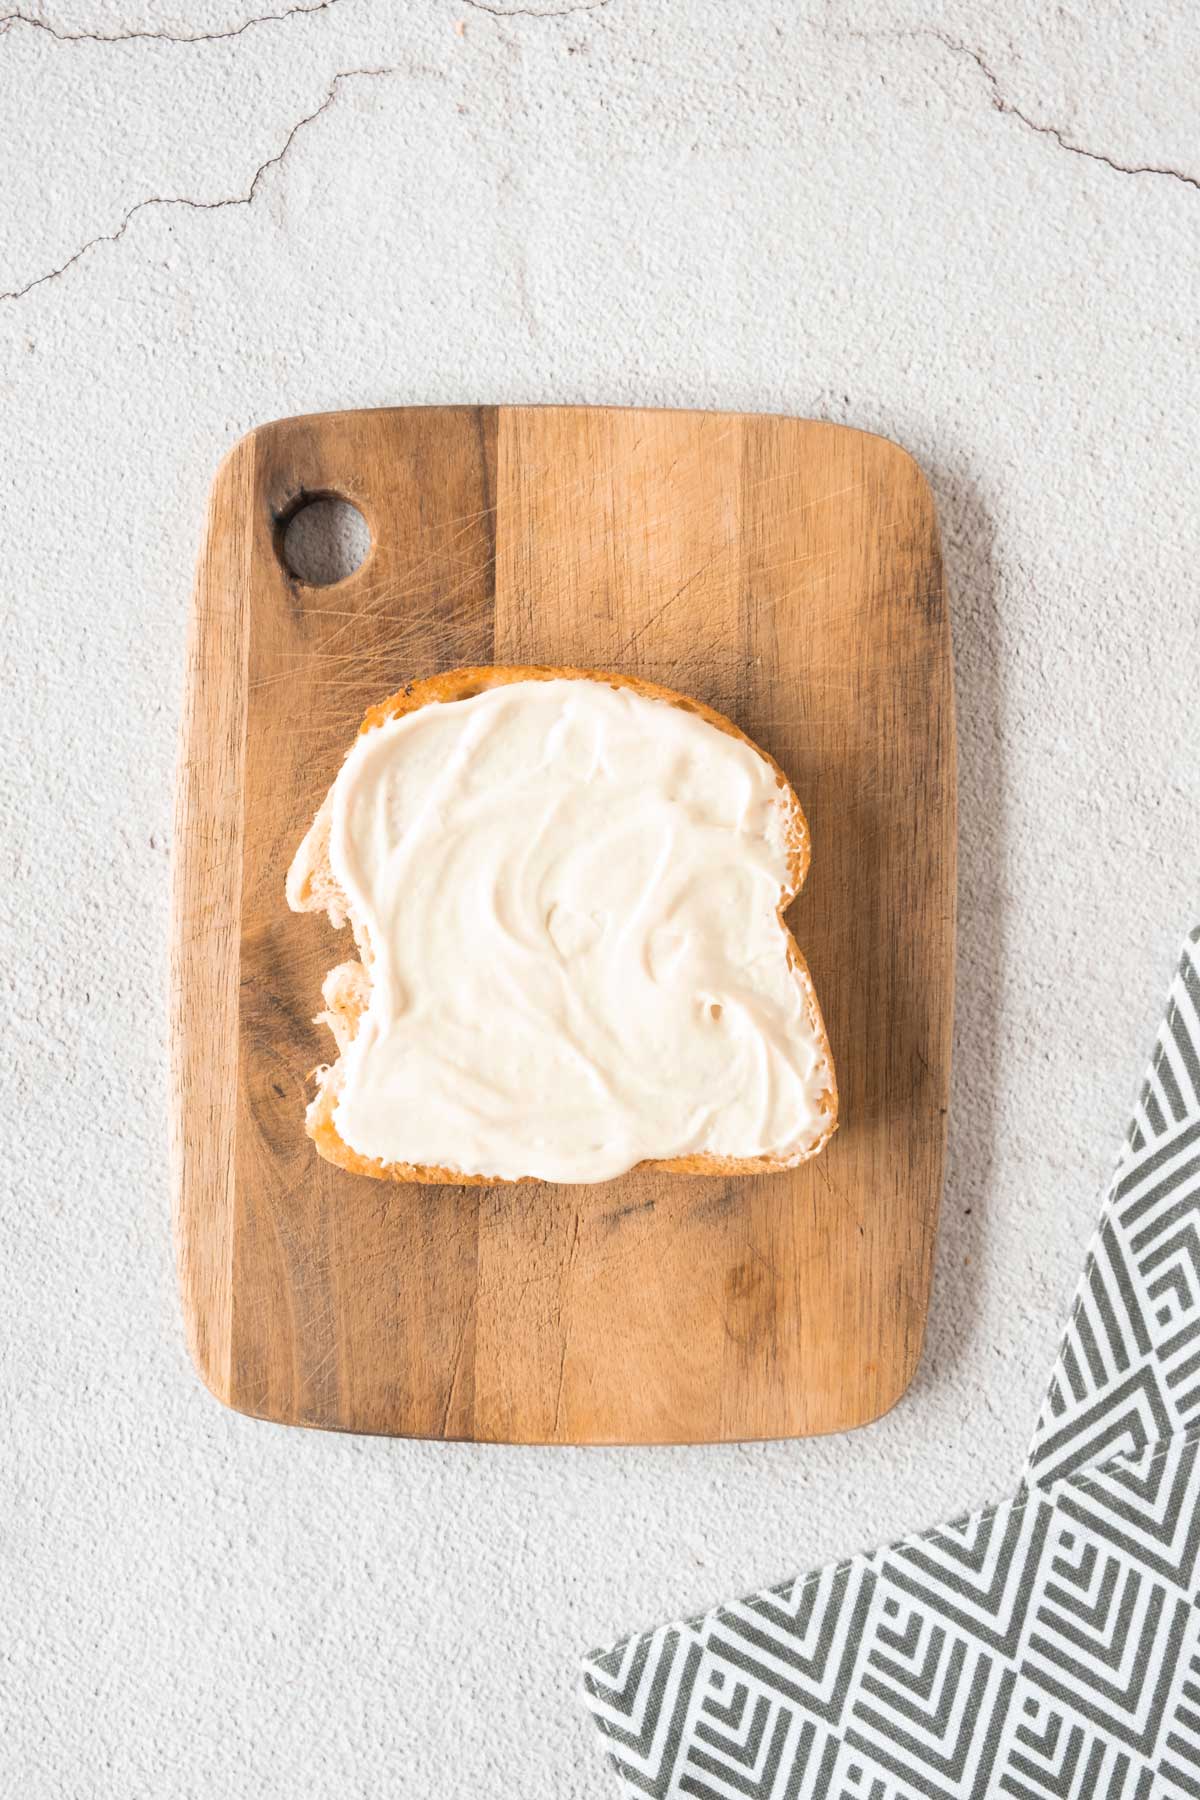 A slice of bread with mayonnaise on a wooden cutting board.